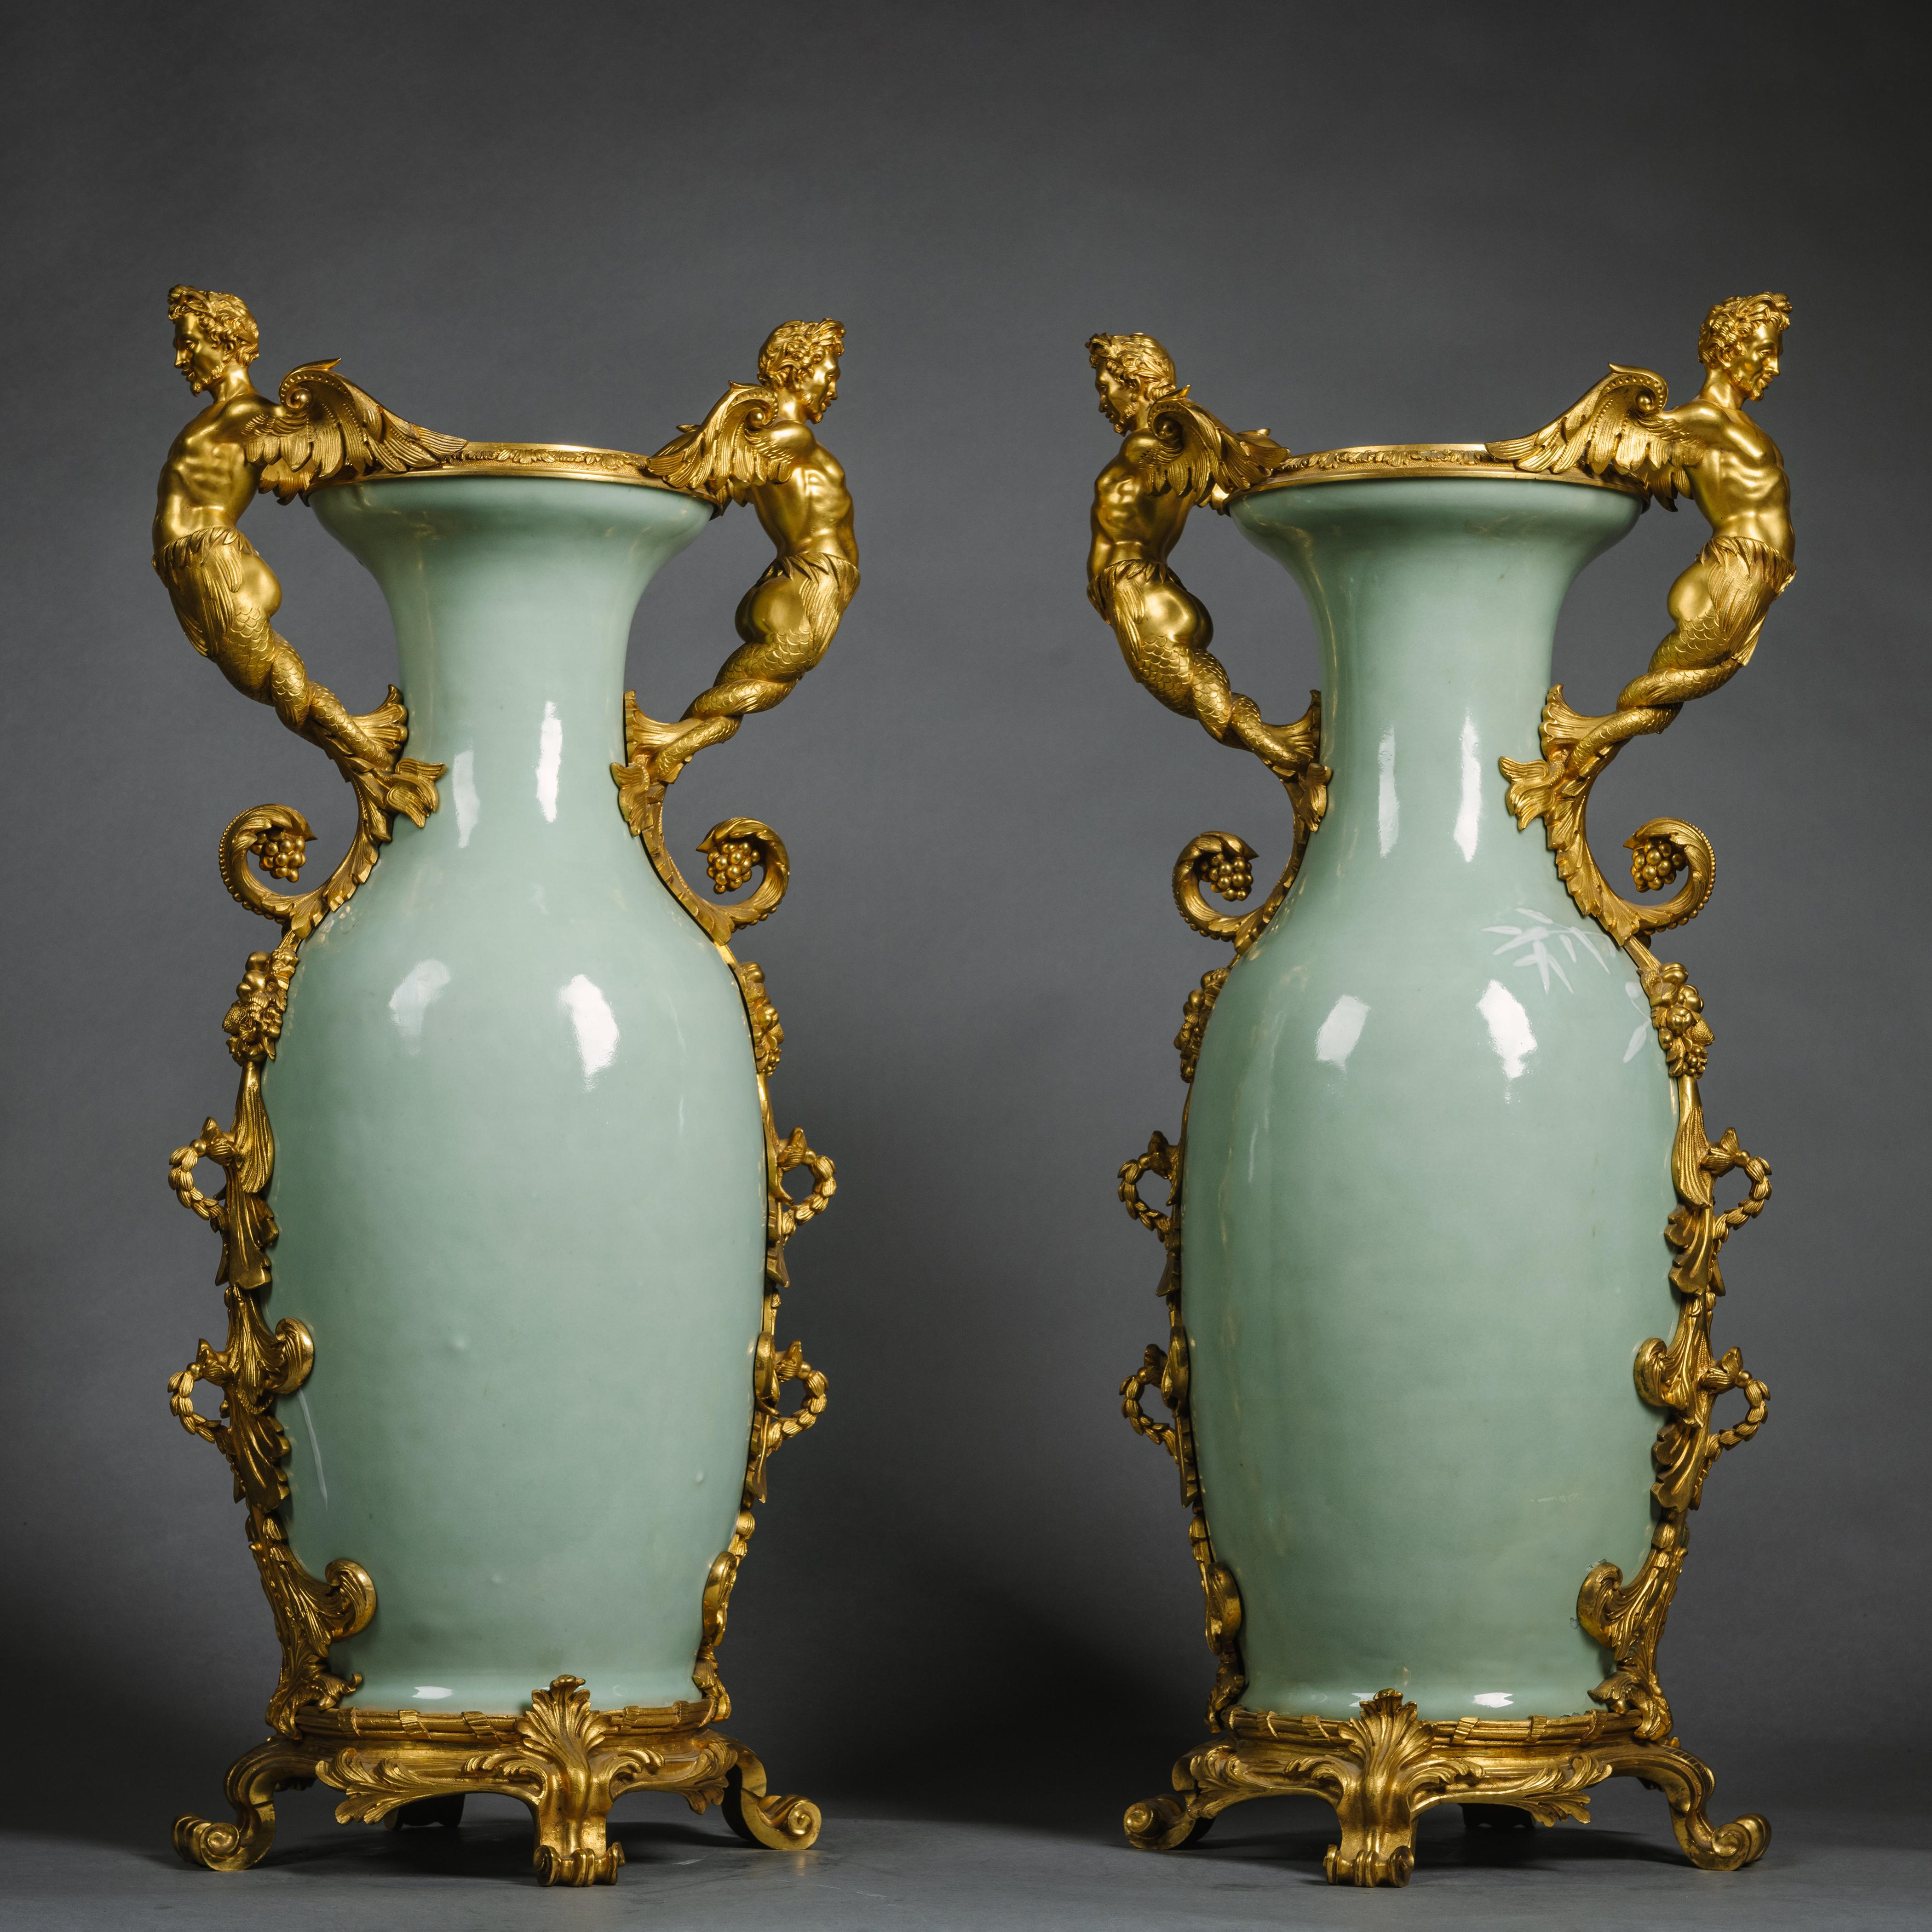 Chinoiserie Pair of Gilt-Bronze Mounted Chinese Celadon-Ground Vases For Sale